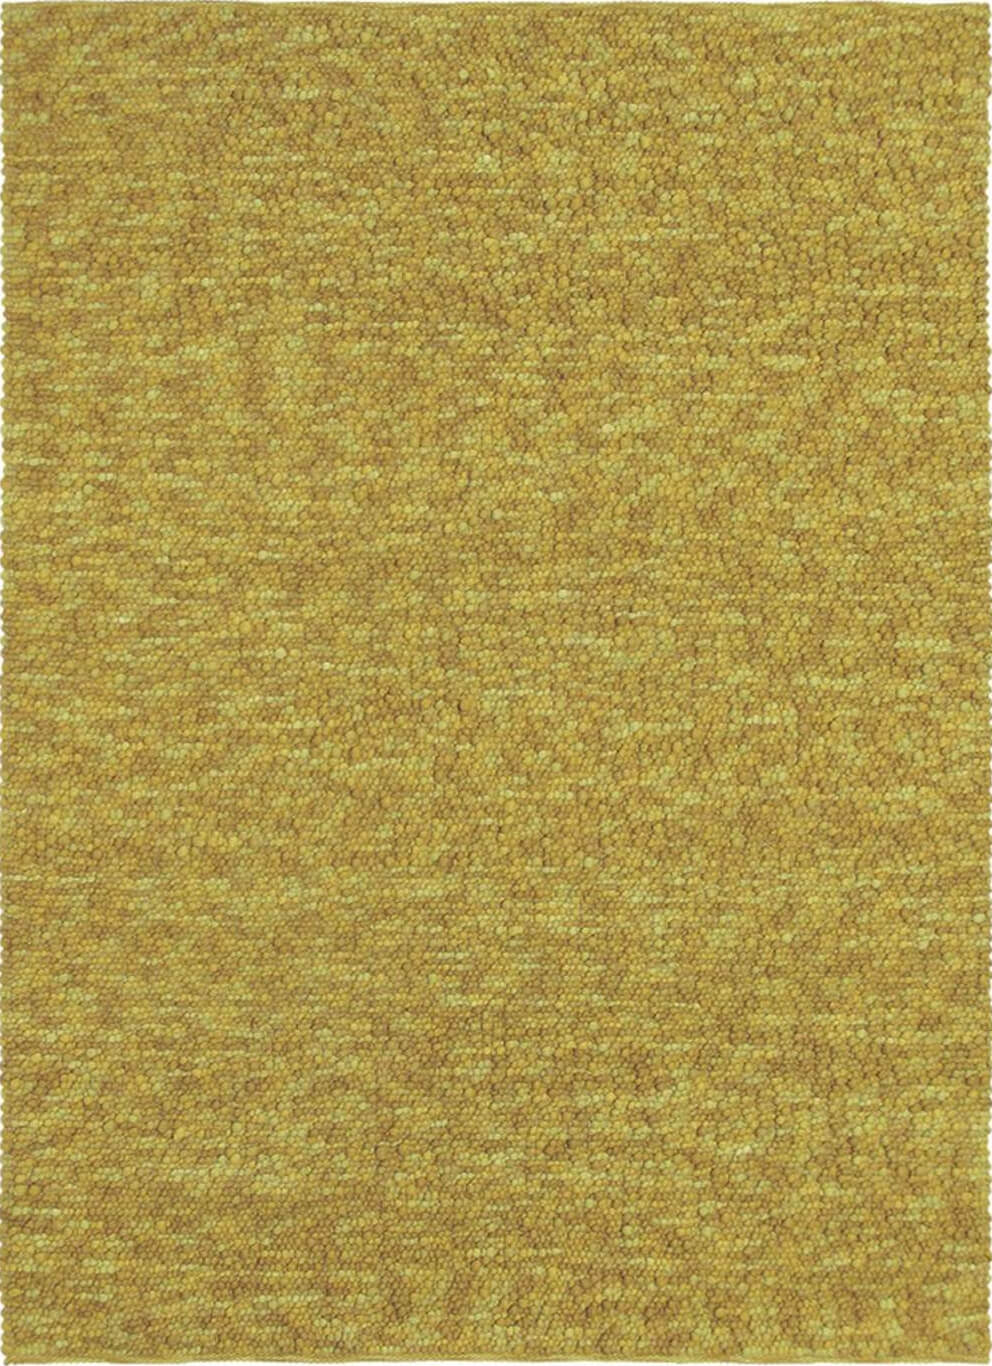 Stubble 29706 Rug by Brink & Campman ☞ Size: 140 x 200 cm